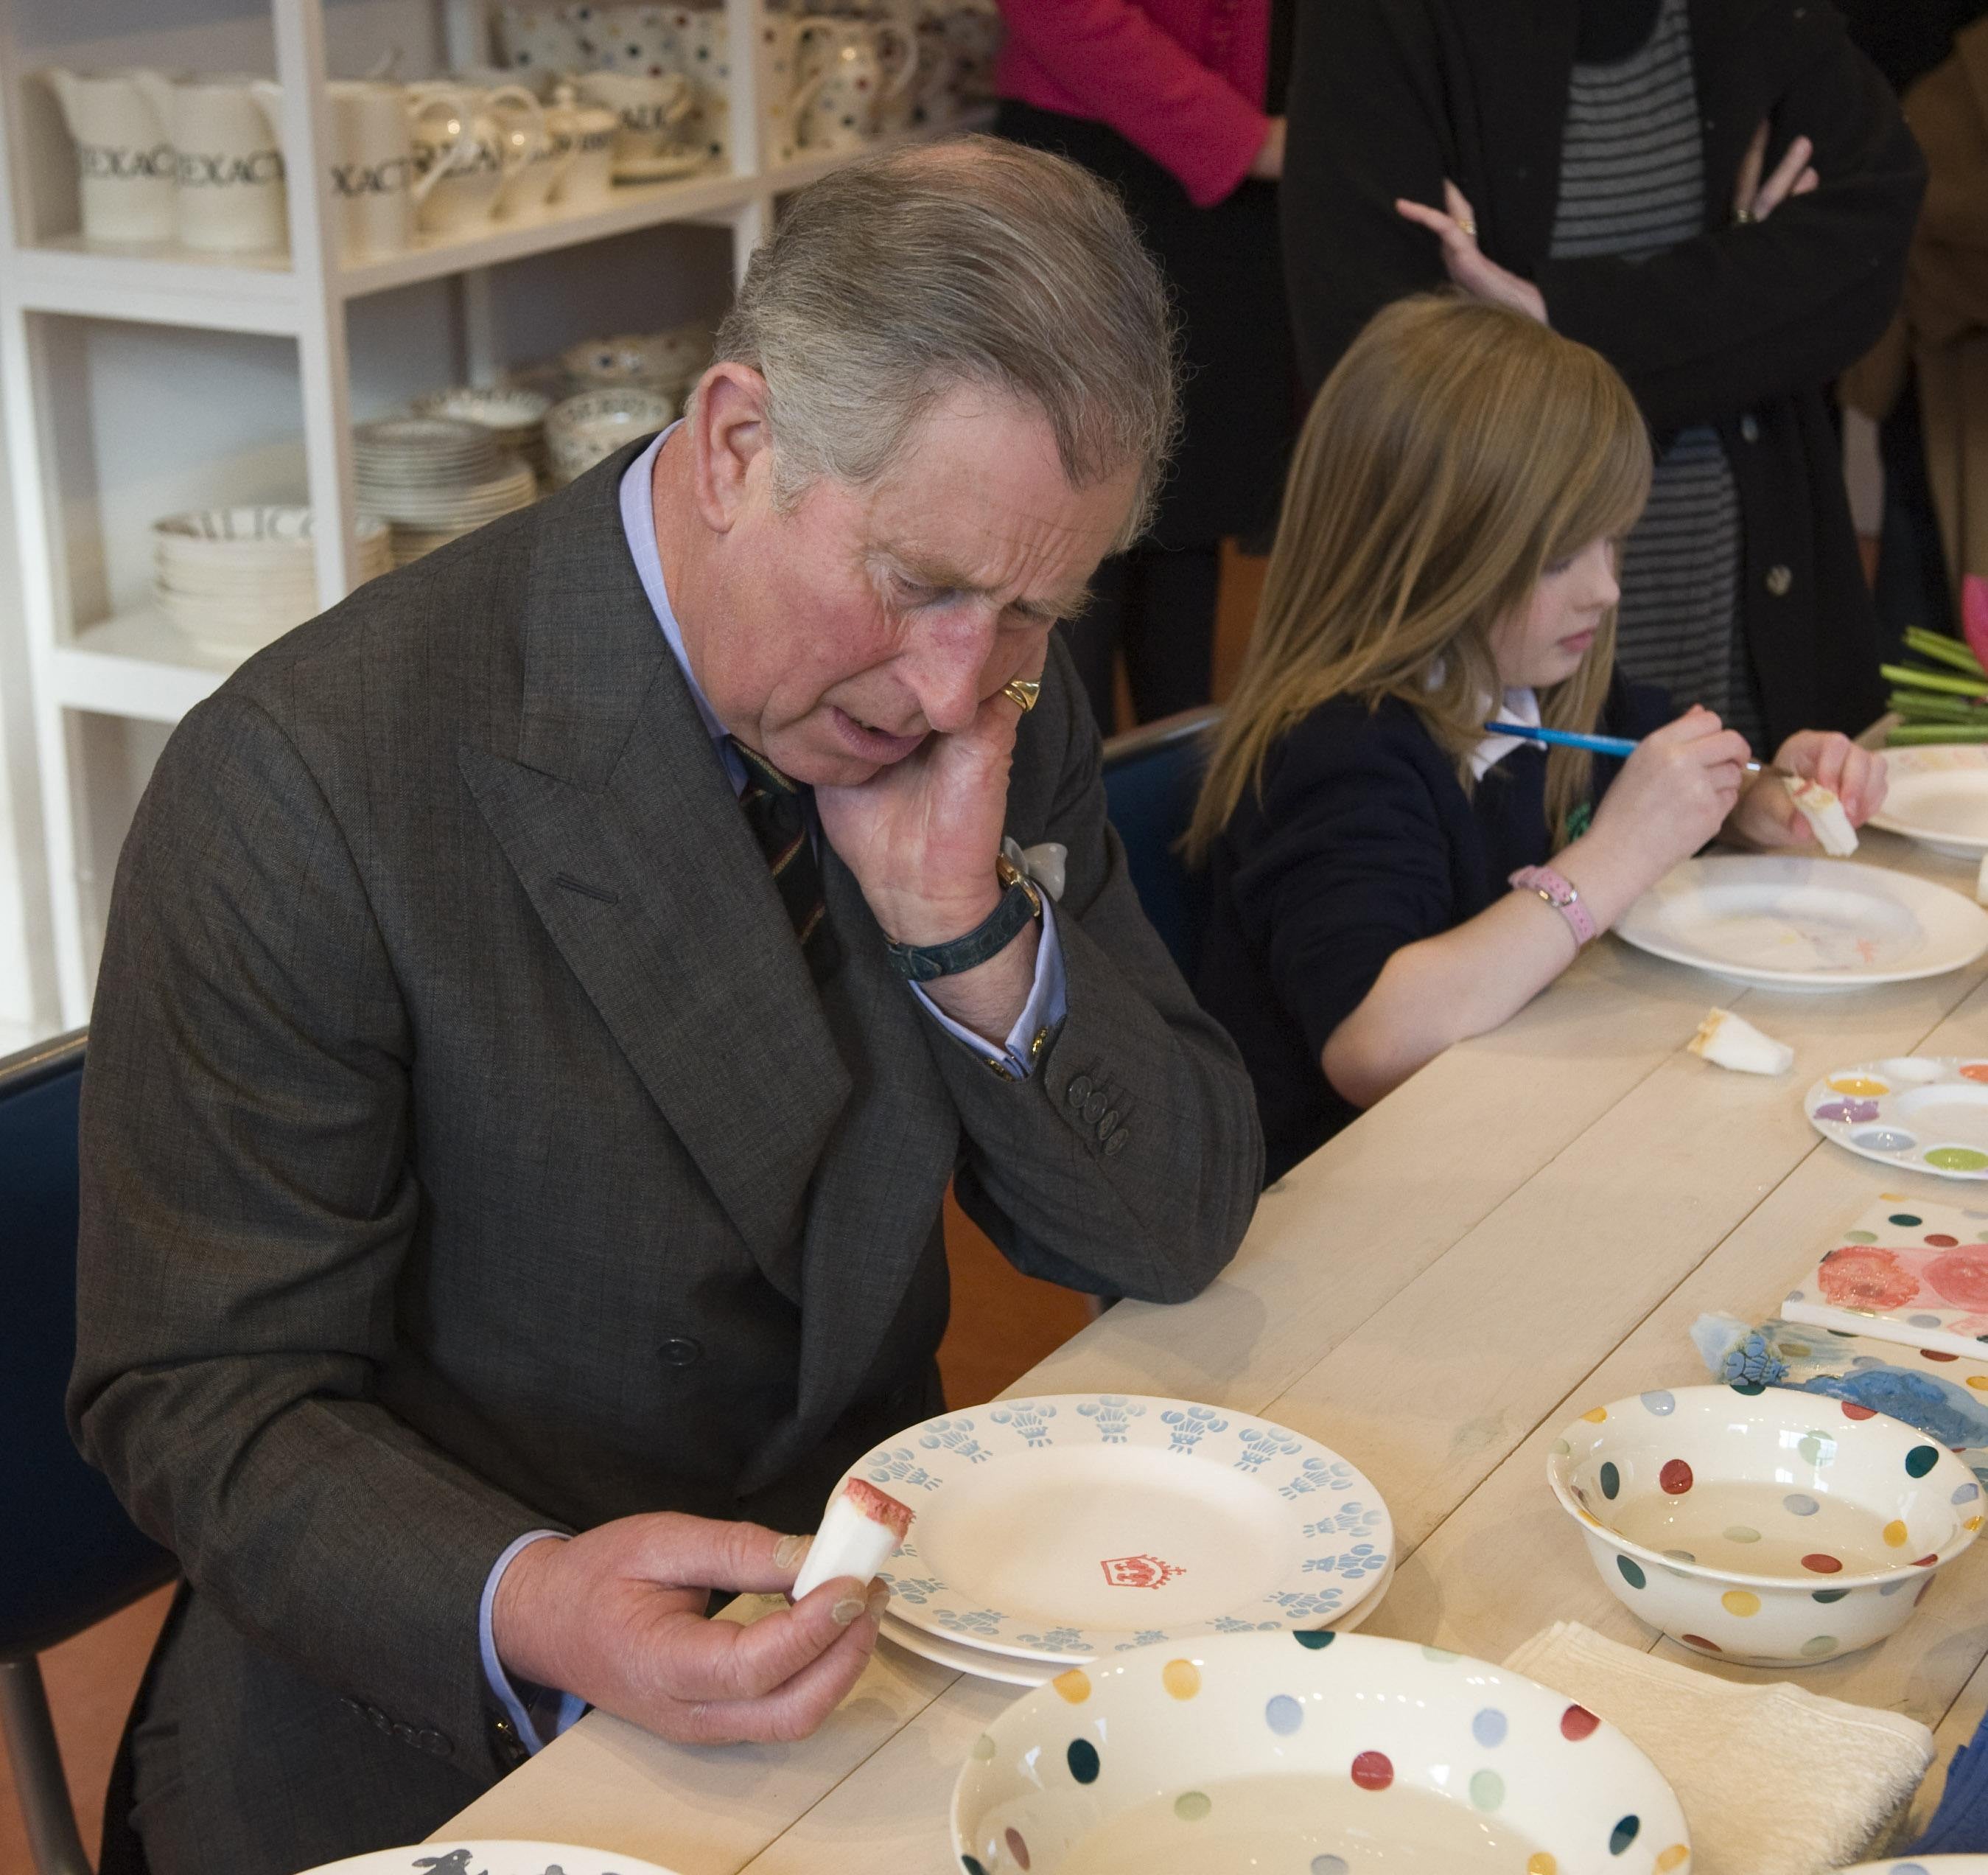 The then Prince of Wales, Charles, taking part in sponge-painting with local schoolchildren, during a previous visit to Emma Bridgewater (Arthur Edwards/The Sun)